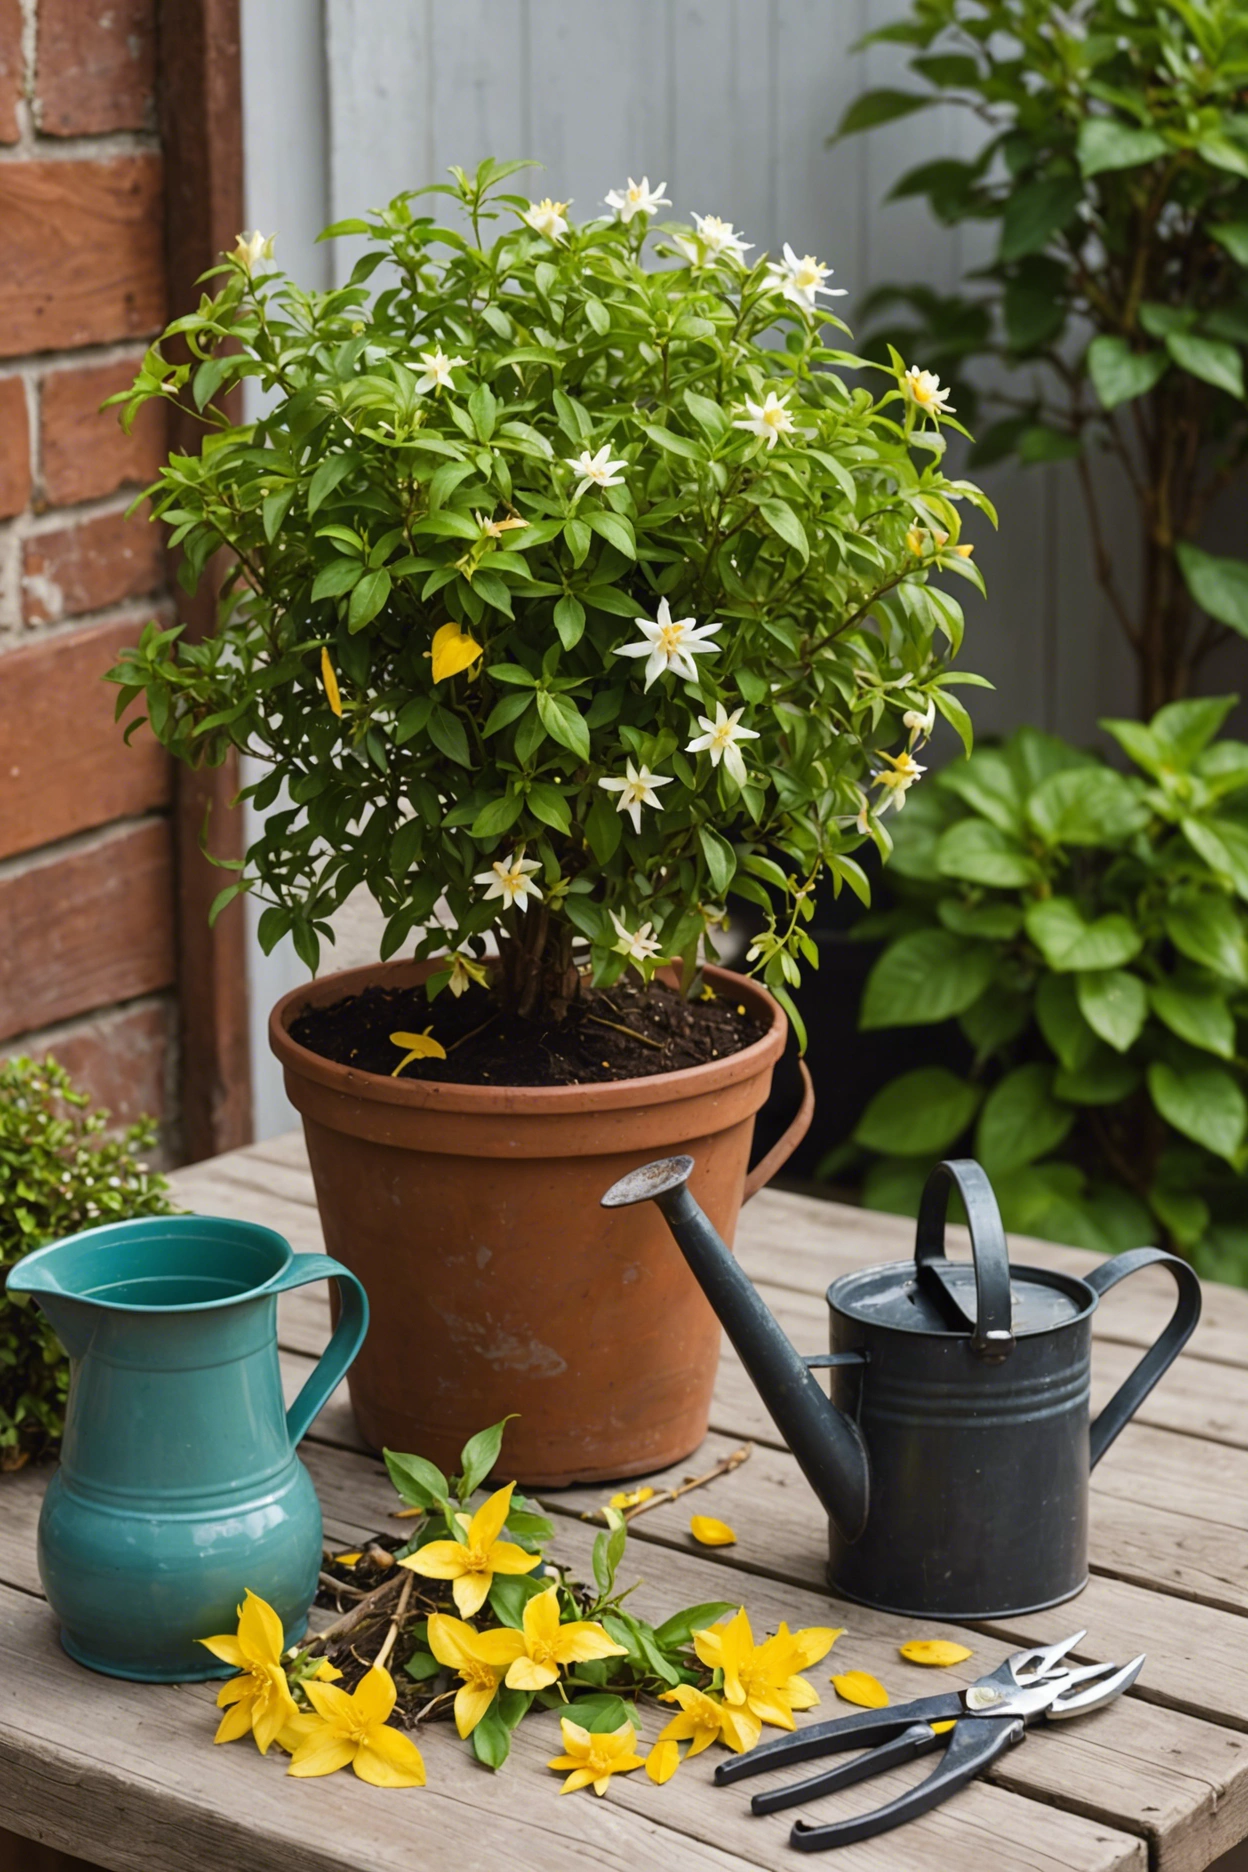 "Wilted jasmine plant with yellow leaves on a garden table, surrounded by pruning shears, a watering can, and organic fertilizer."